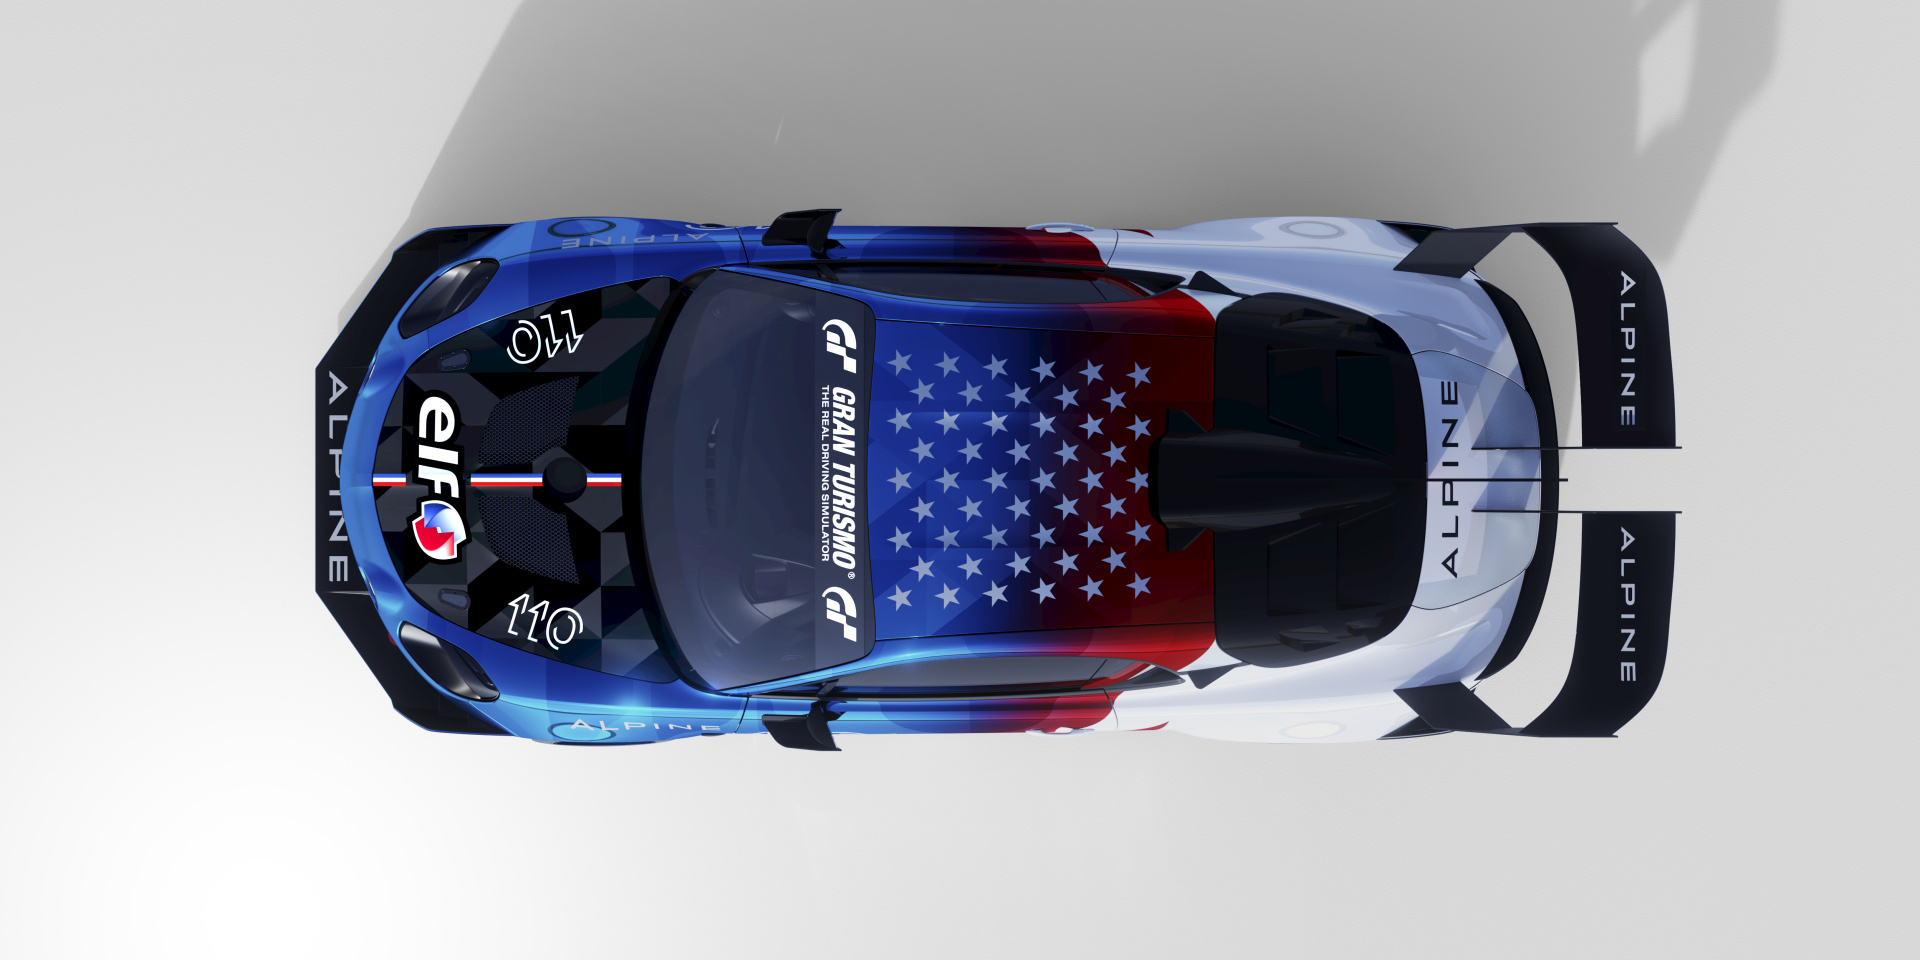 SMALL_Alpine presents the A110 Pikes Peak to tackle the American summits (6)